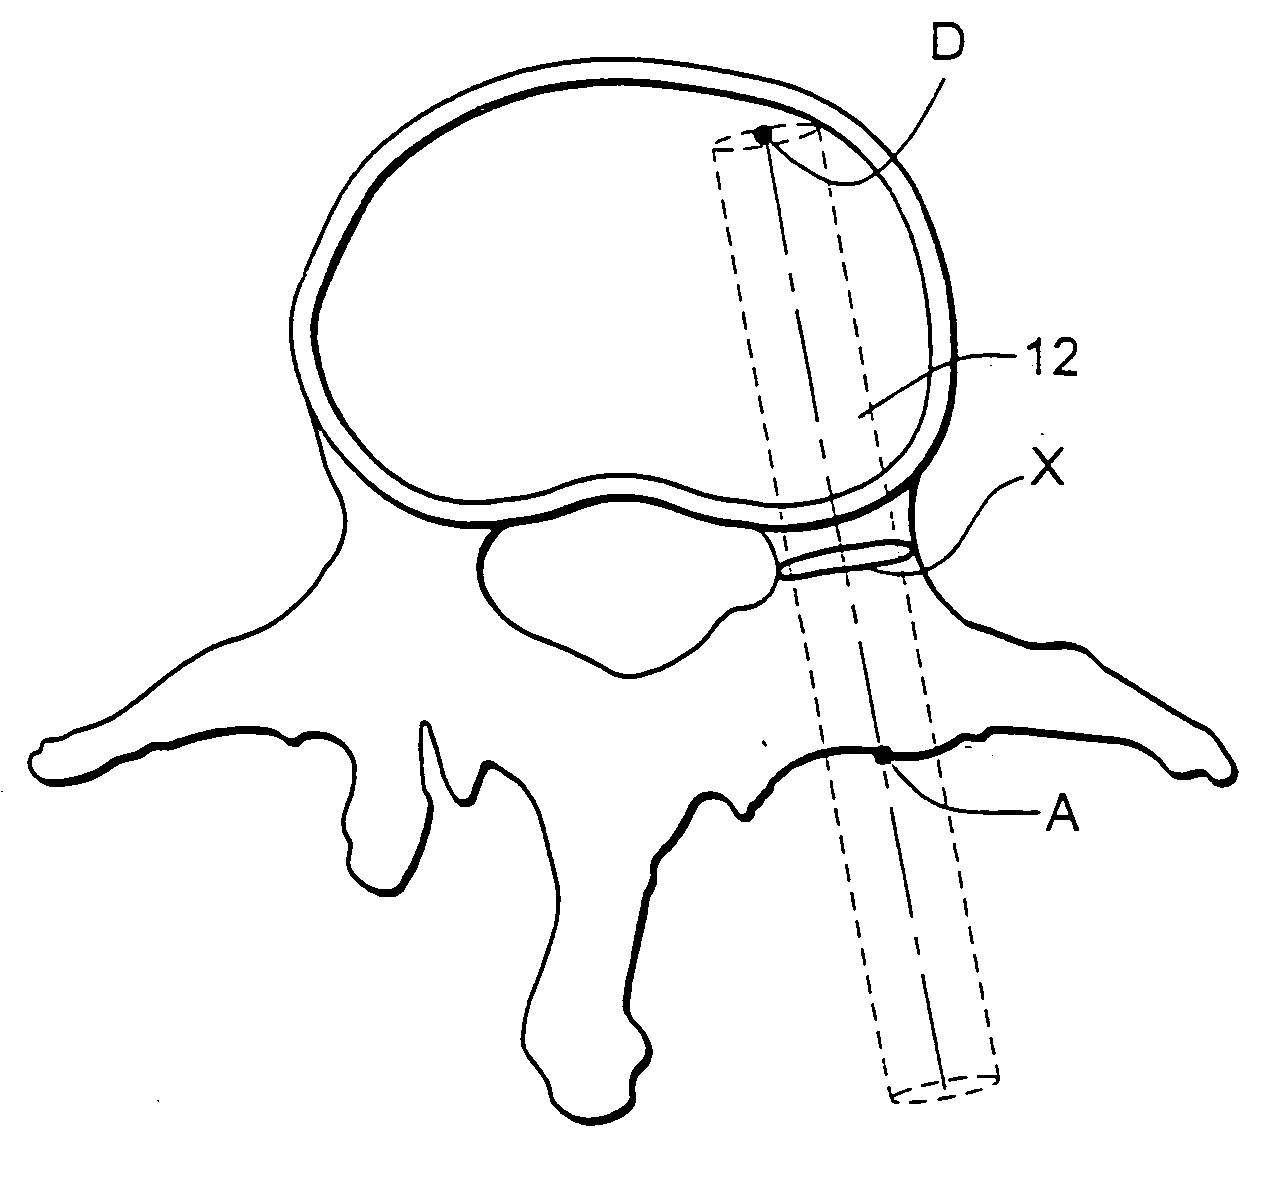 System and methods for improved access to vertebral bodies for kyphoplasty, vertebroplasty, vertebral body biopsy or screw placement